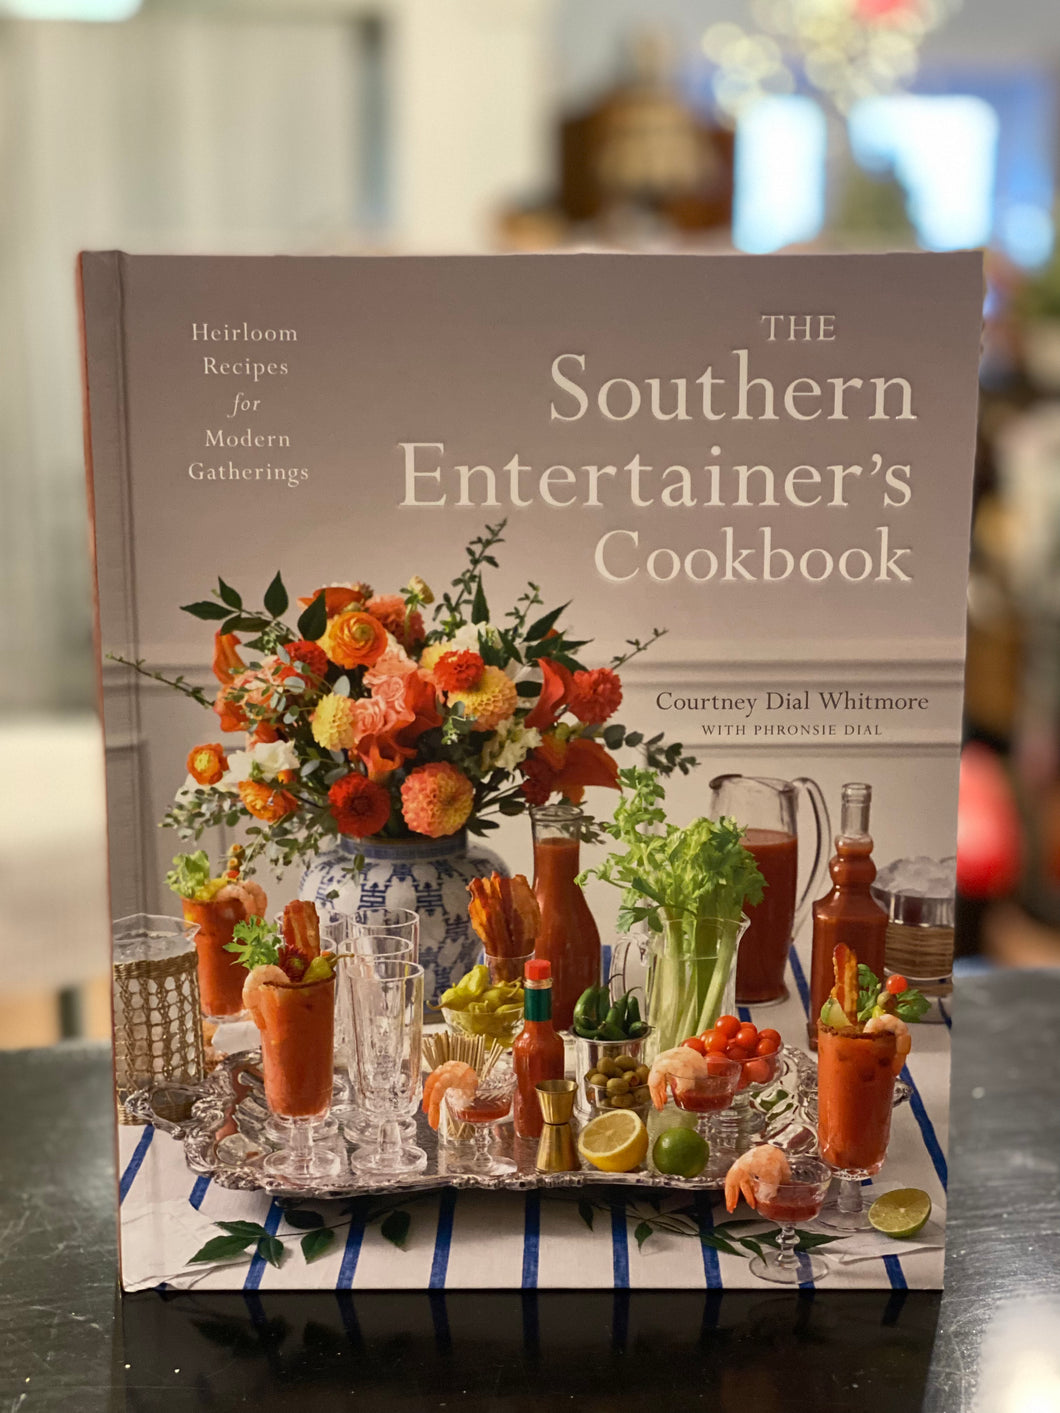 The Southern Entertainer’s Cookbook